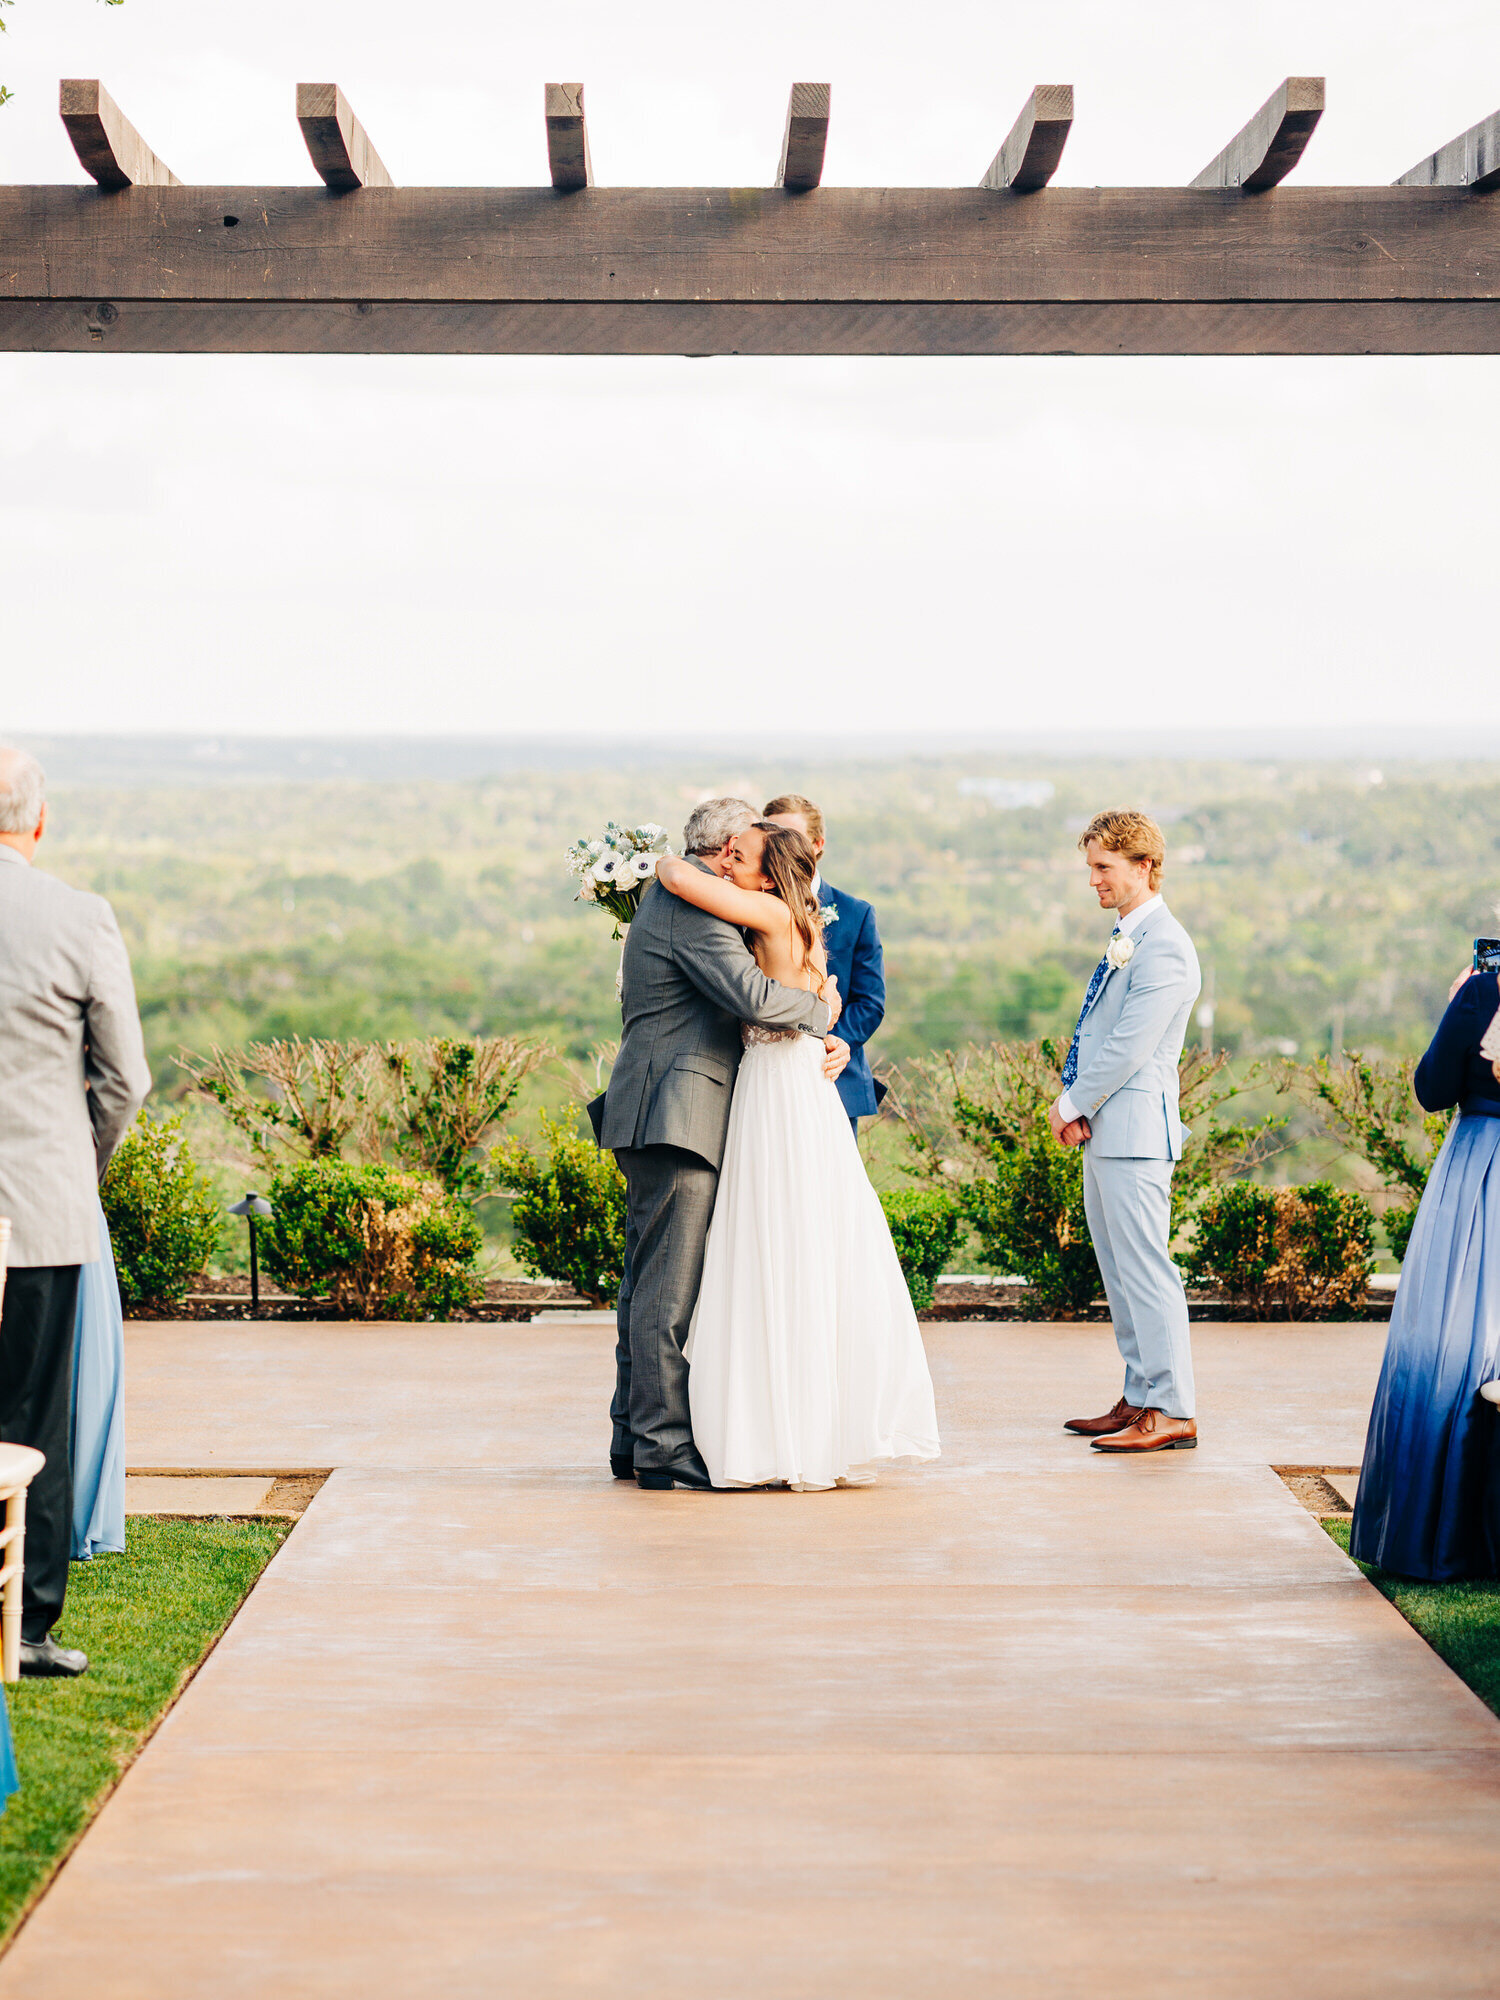 This image, taken by a San Antonio wedding photographer, features a bride hugging her dad as he gives her away at the start of their wedding ceremony. There is a view of the hill country behind them, and the groom stands to the side in a baby blue suit as he smiles.